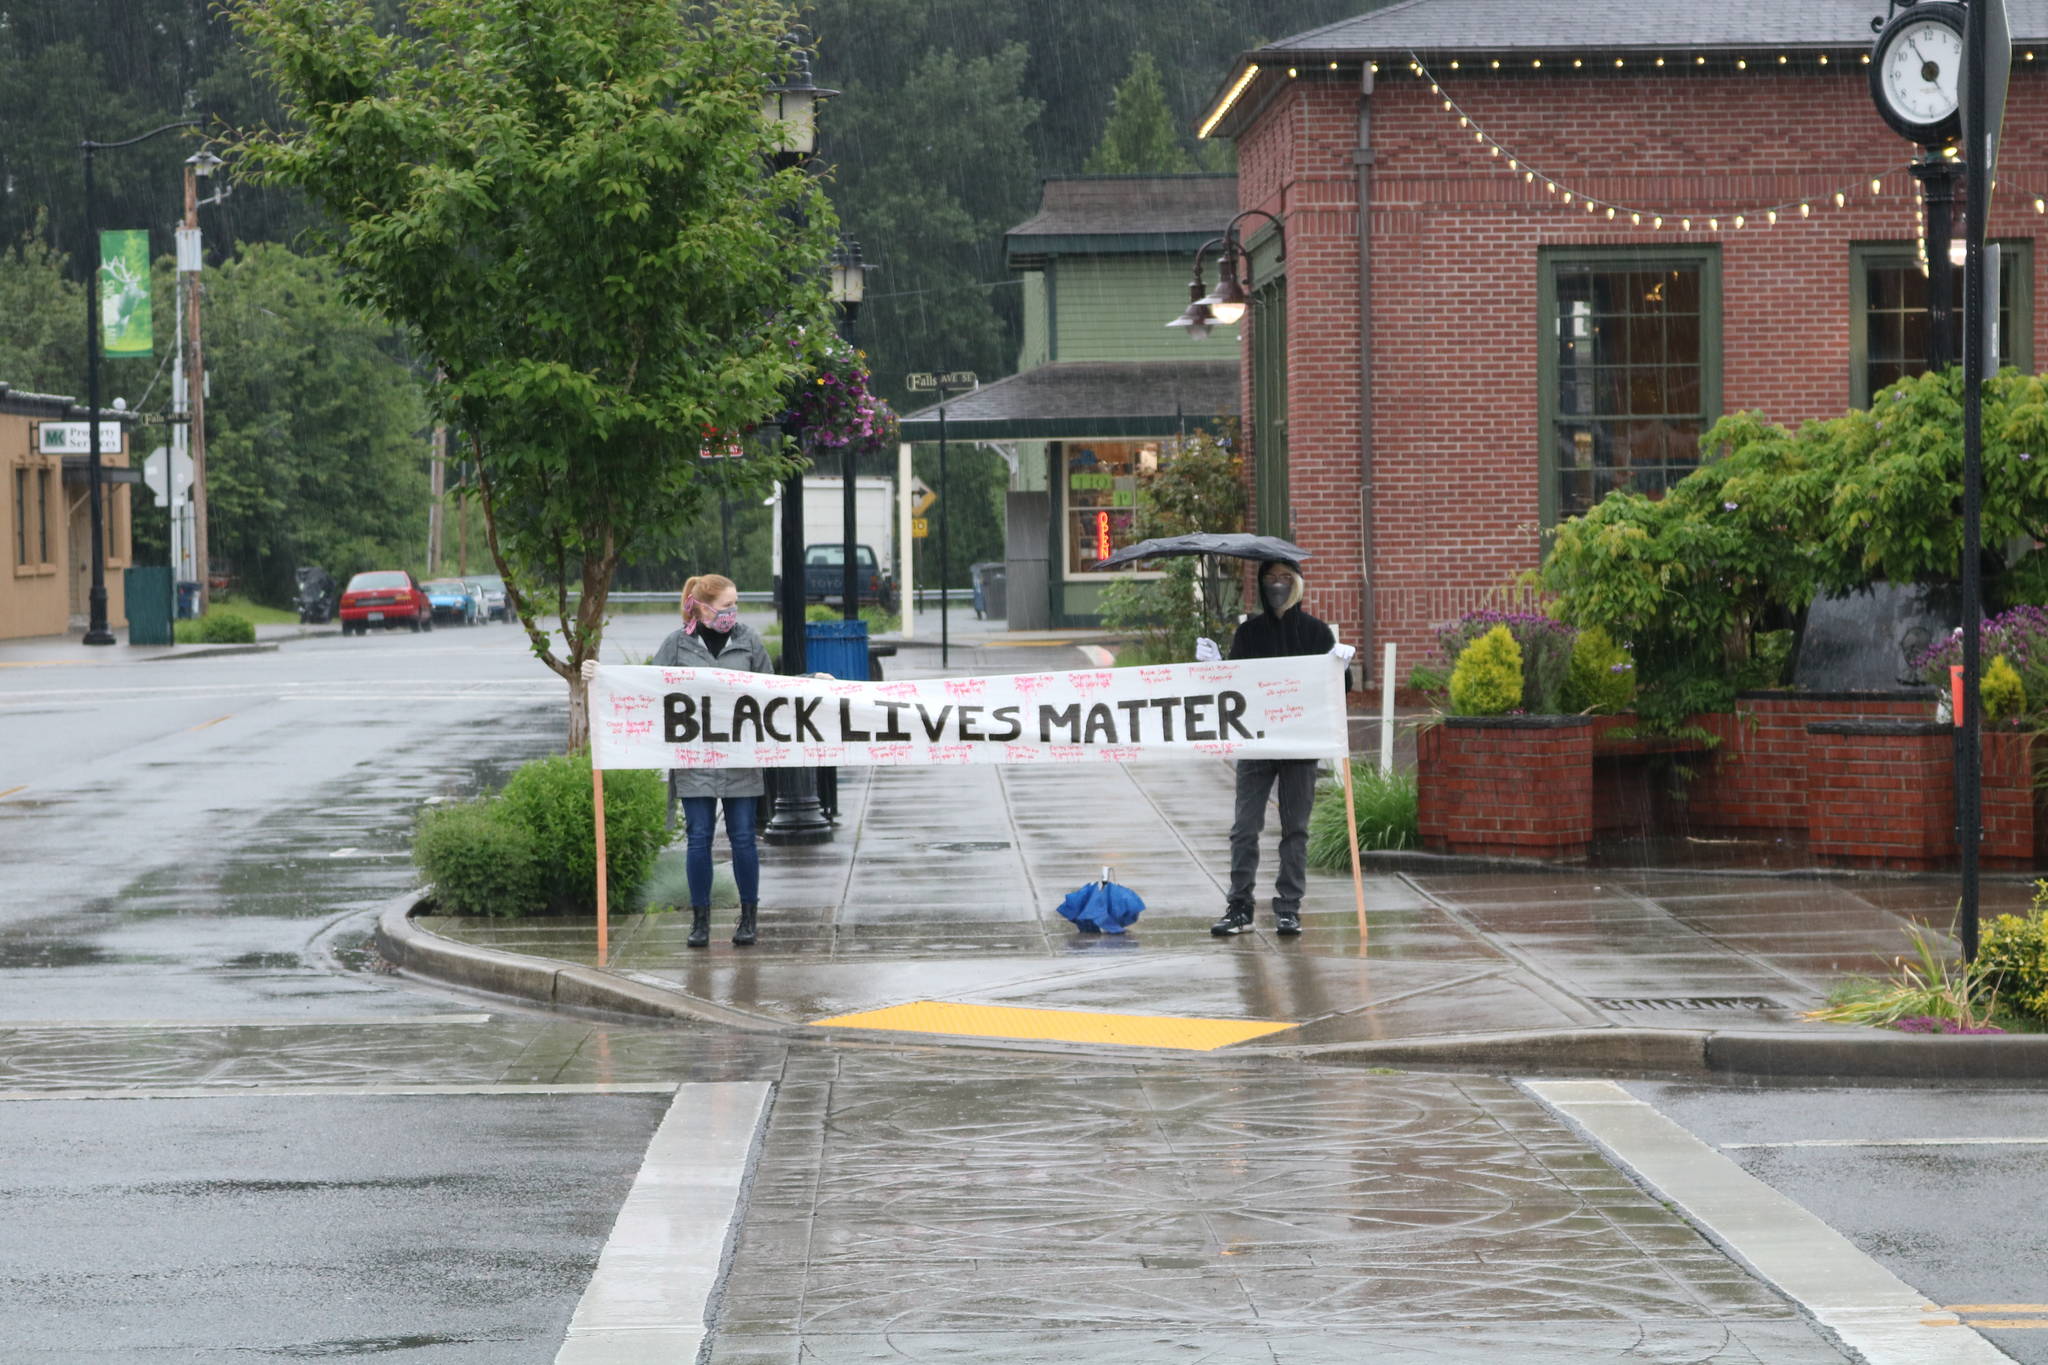 Aaron Kunkler/staff photo
Protesters gathered in downtown Snoqualmie on May 30 to voice their opposition to police violence against people of color.